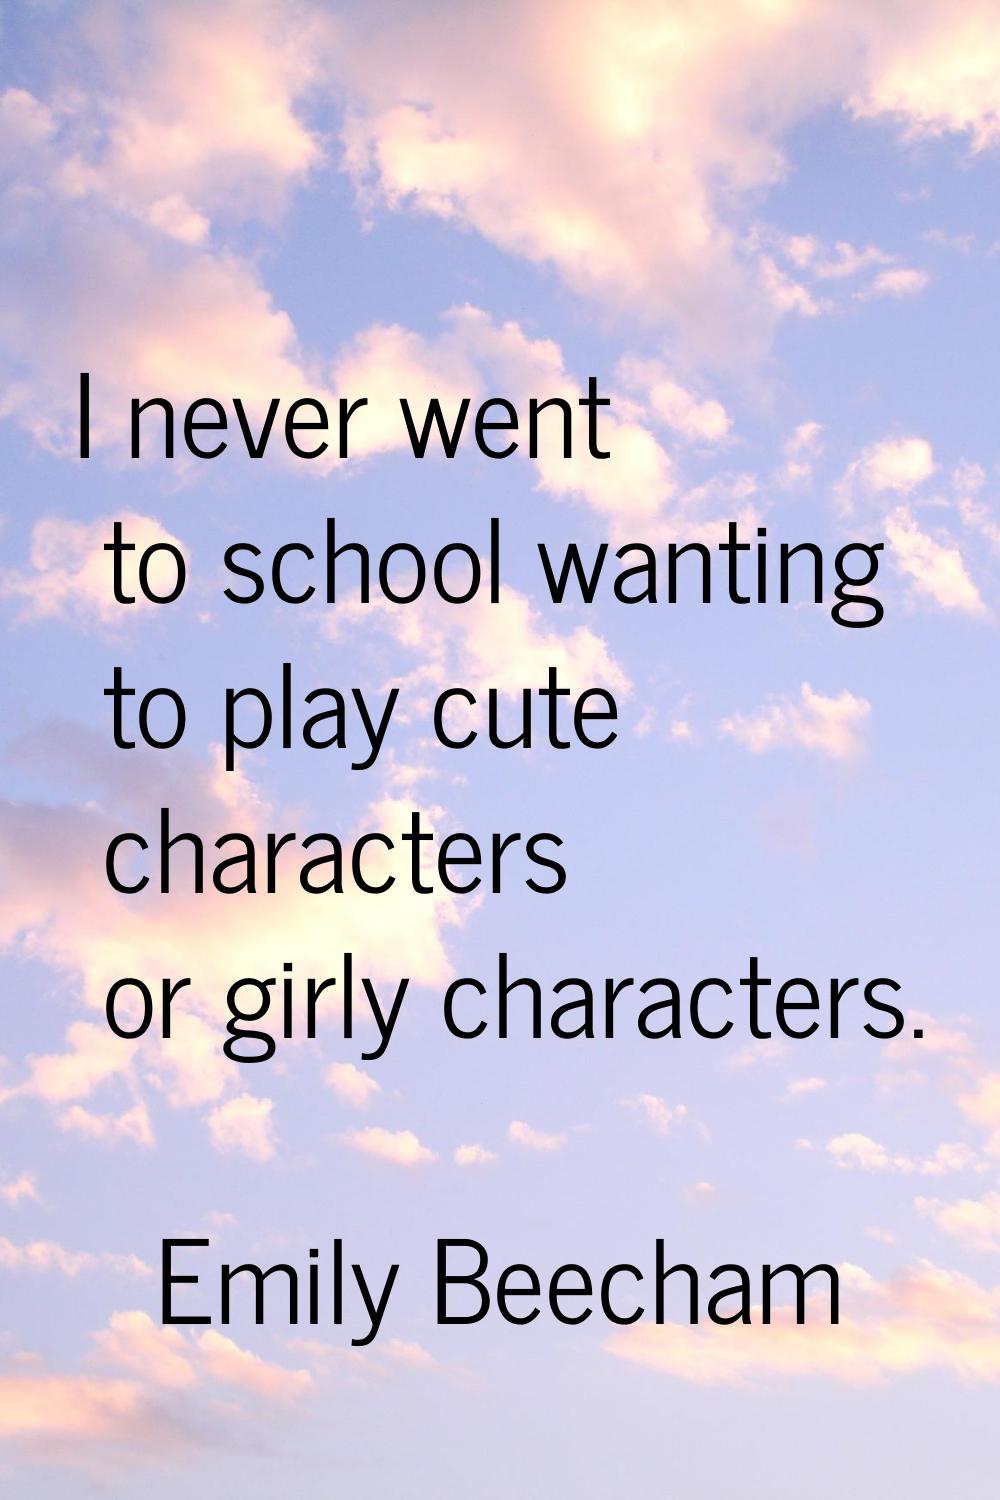 I never went to school wanting to play cute characters or girly characters.